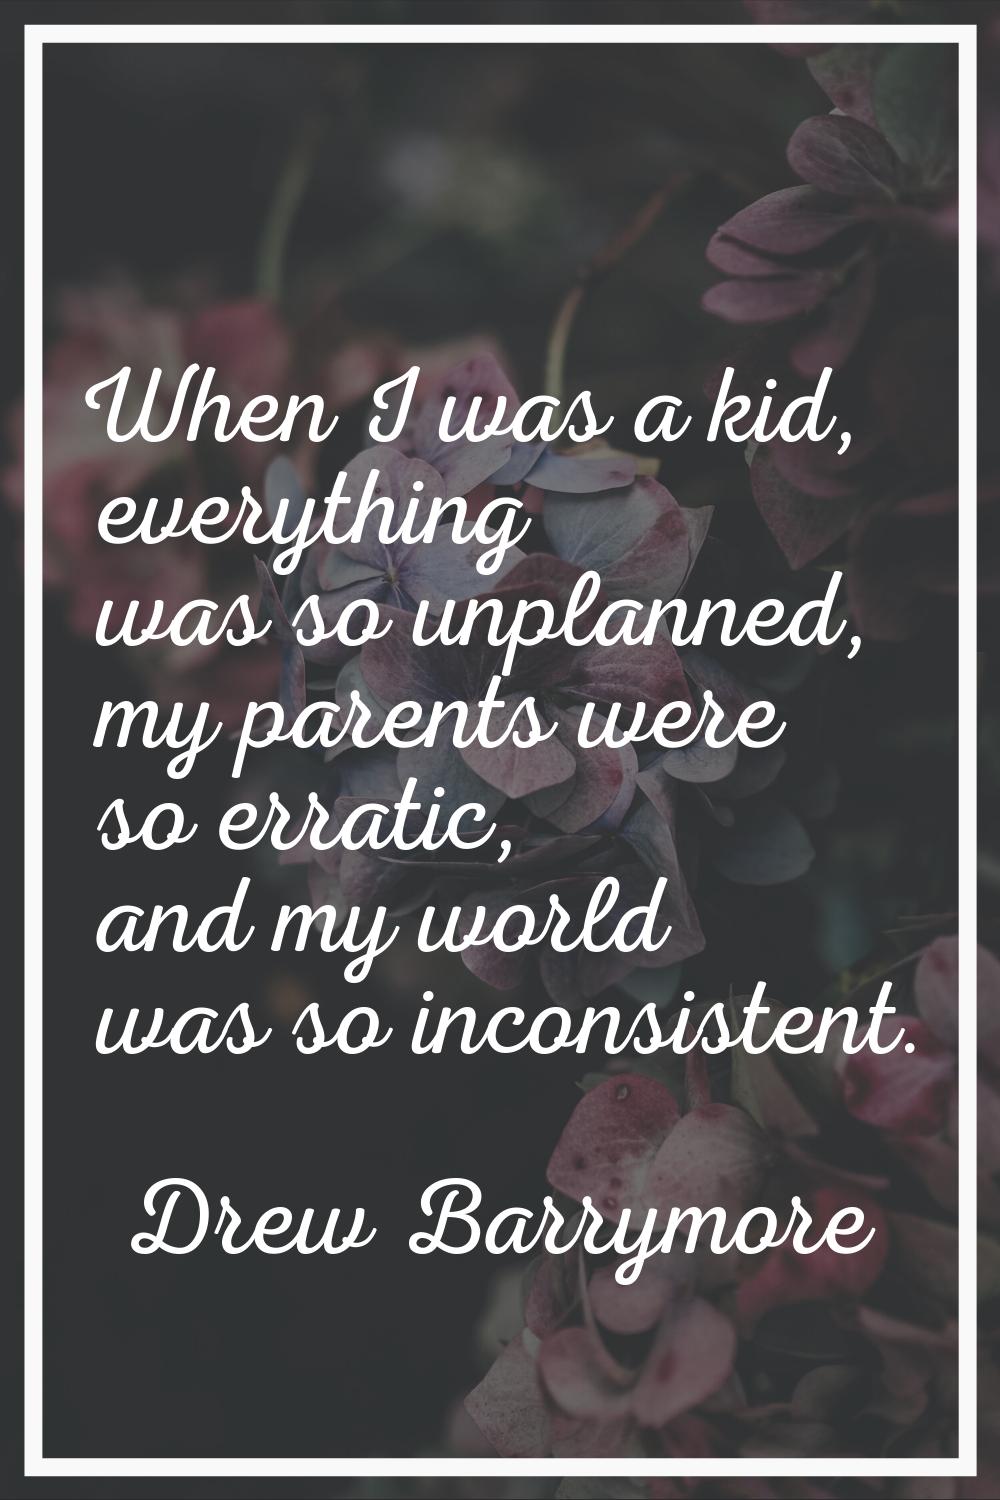 When I was a kid, everything was so unplanned, my parents were so erratic, and my world was so inco